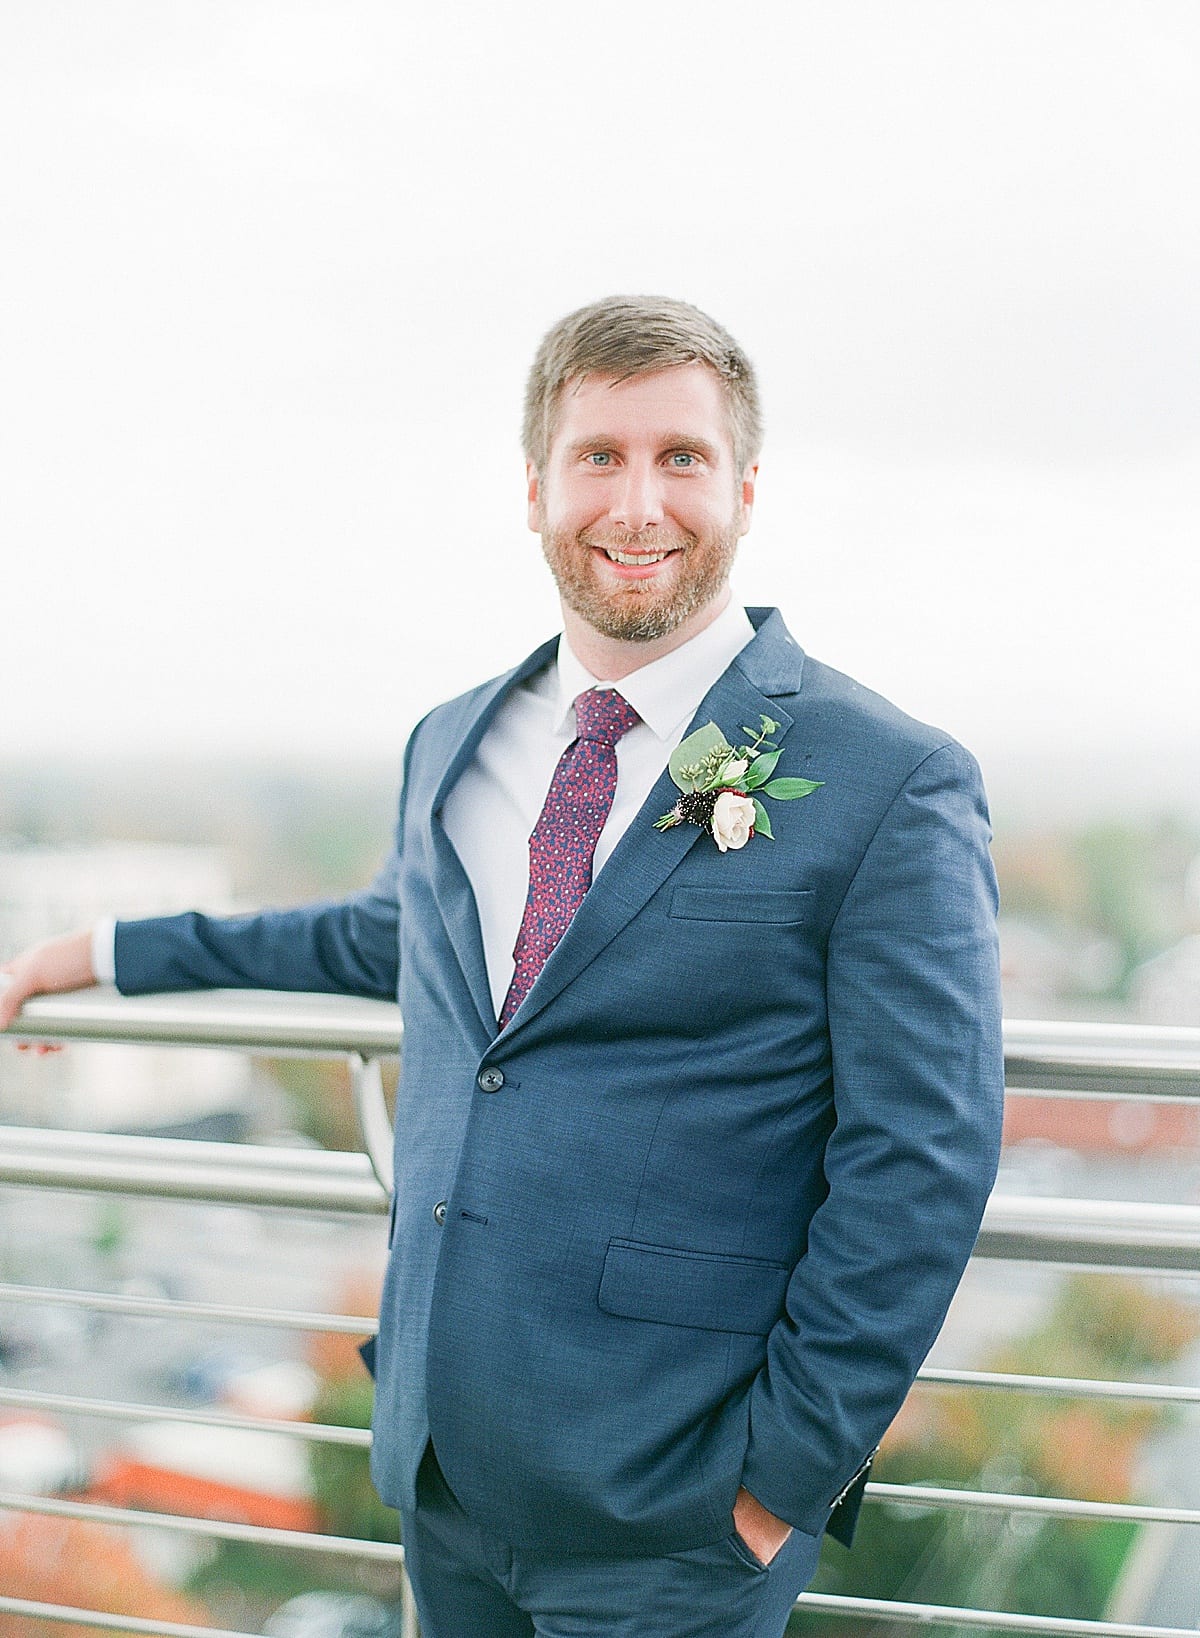 Asheville Capital Club Wedding Groom Leaning on Rail Smiling at Camera Photo